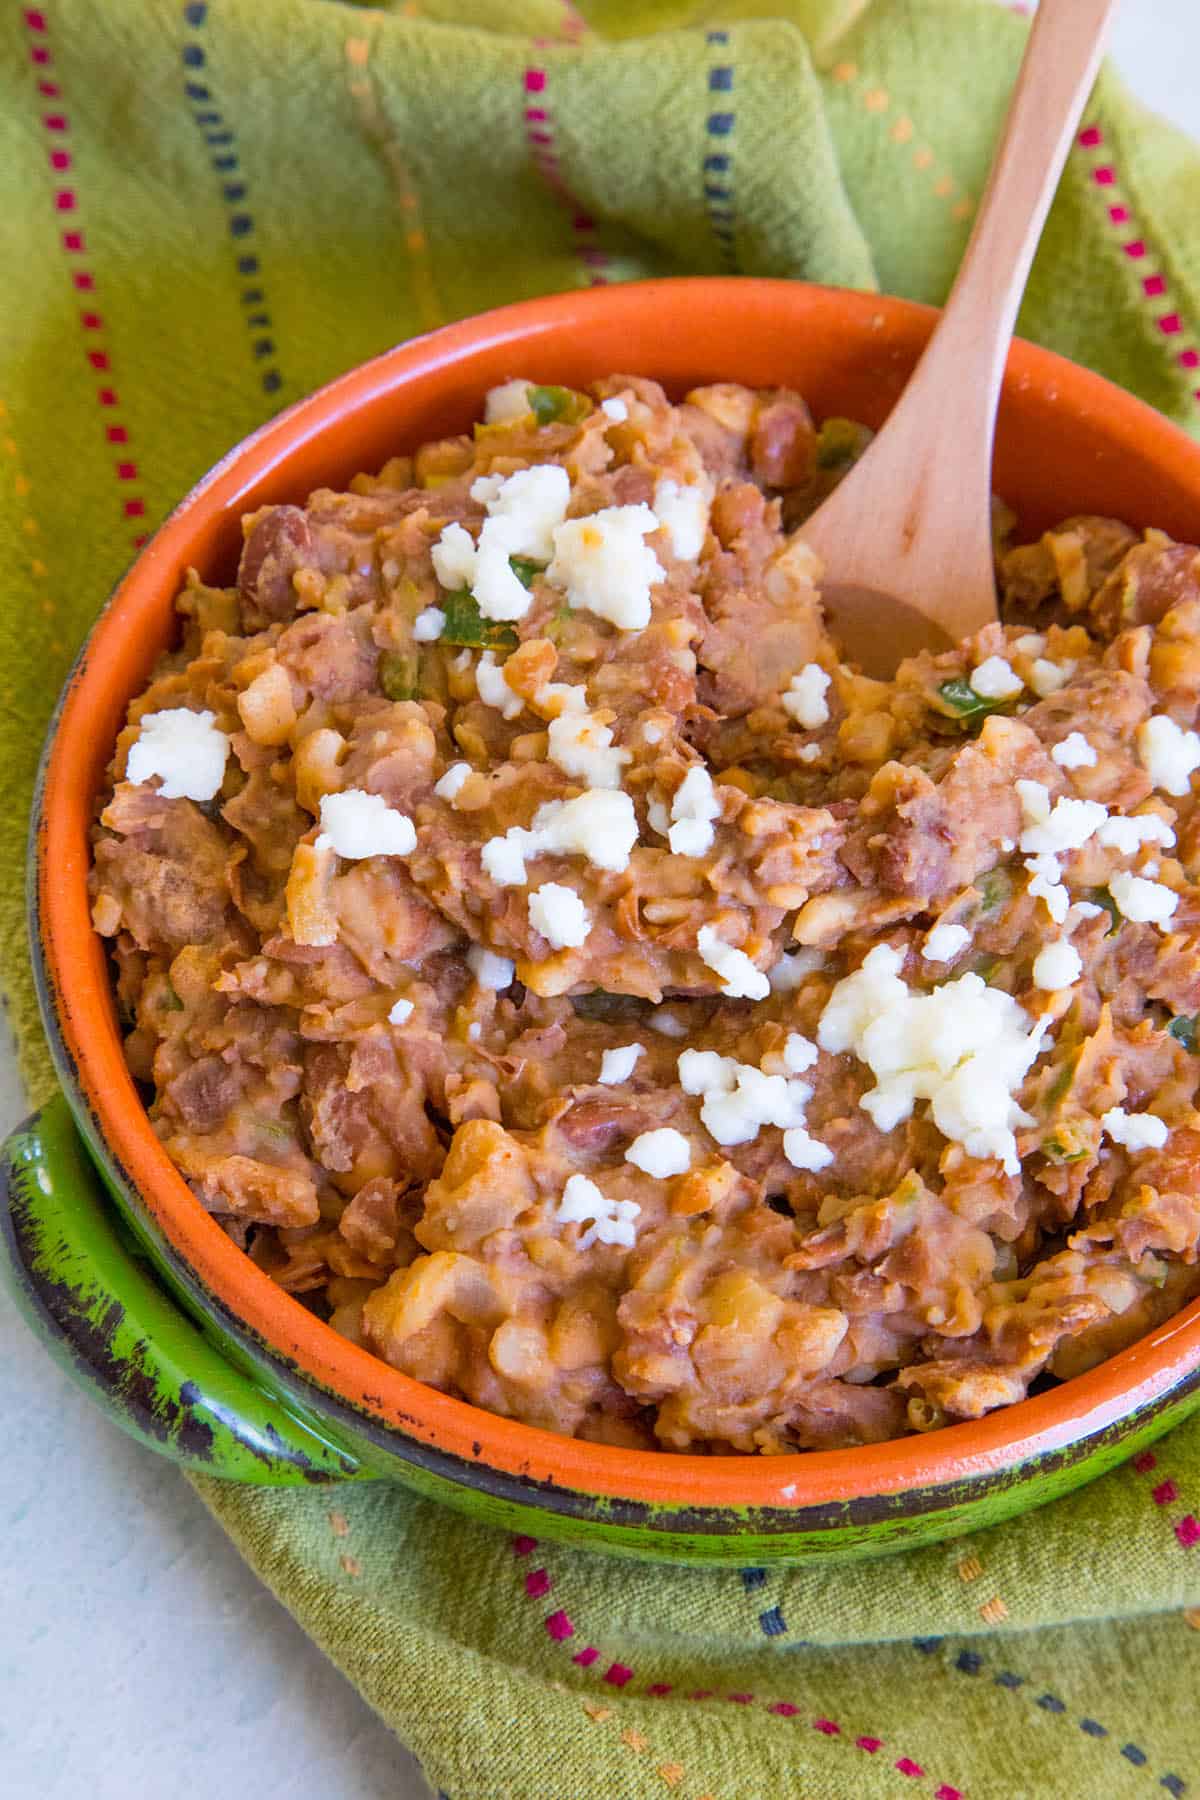 Easy Homemade Refried Beans in a bowl, ready for serving